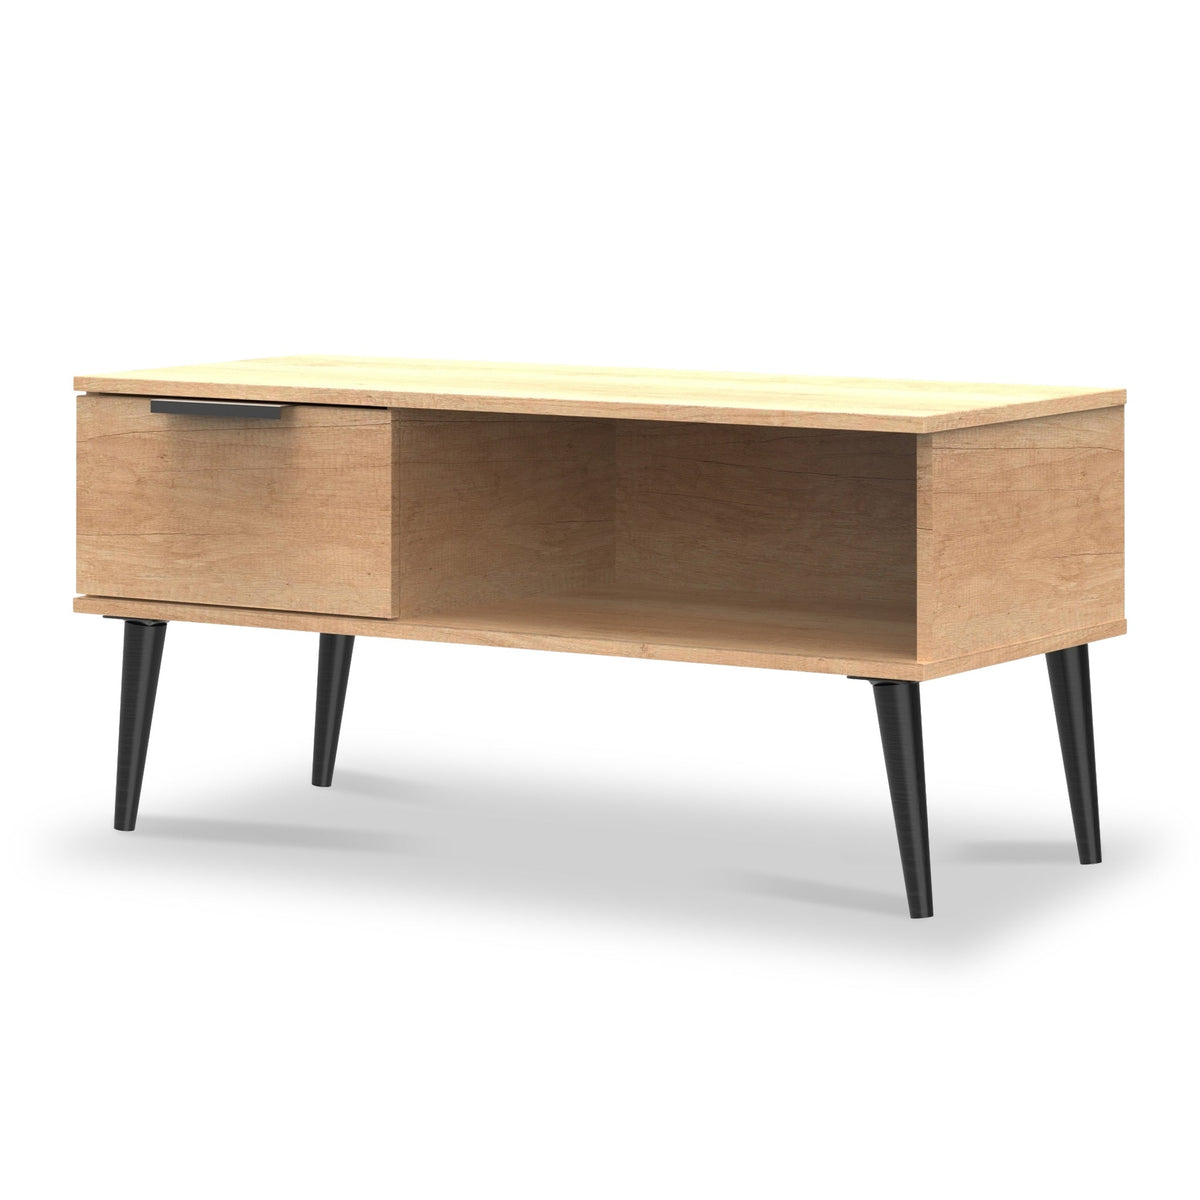 Asher Light Oak 1 Drawer Coffee table with Storage with black legs